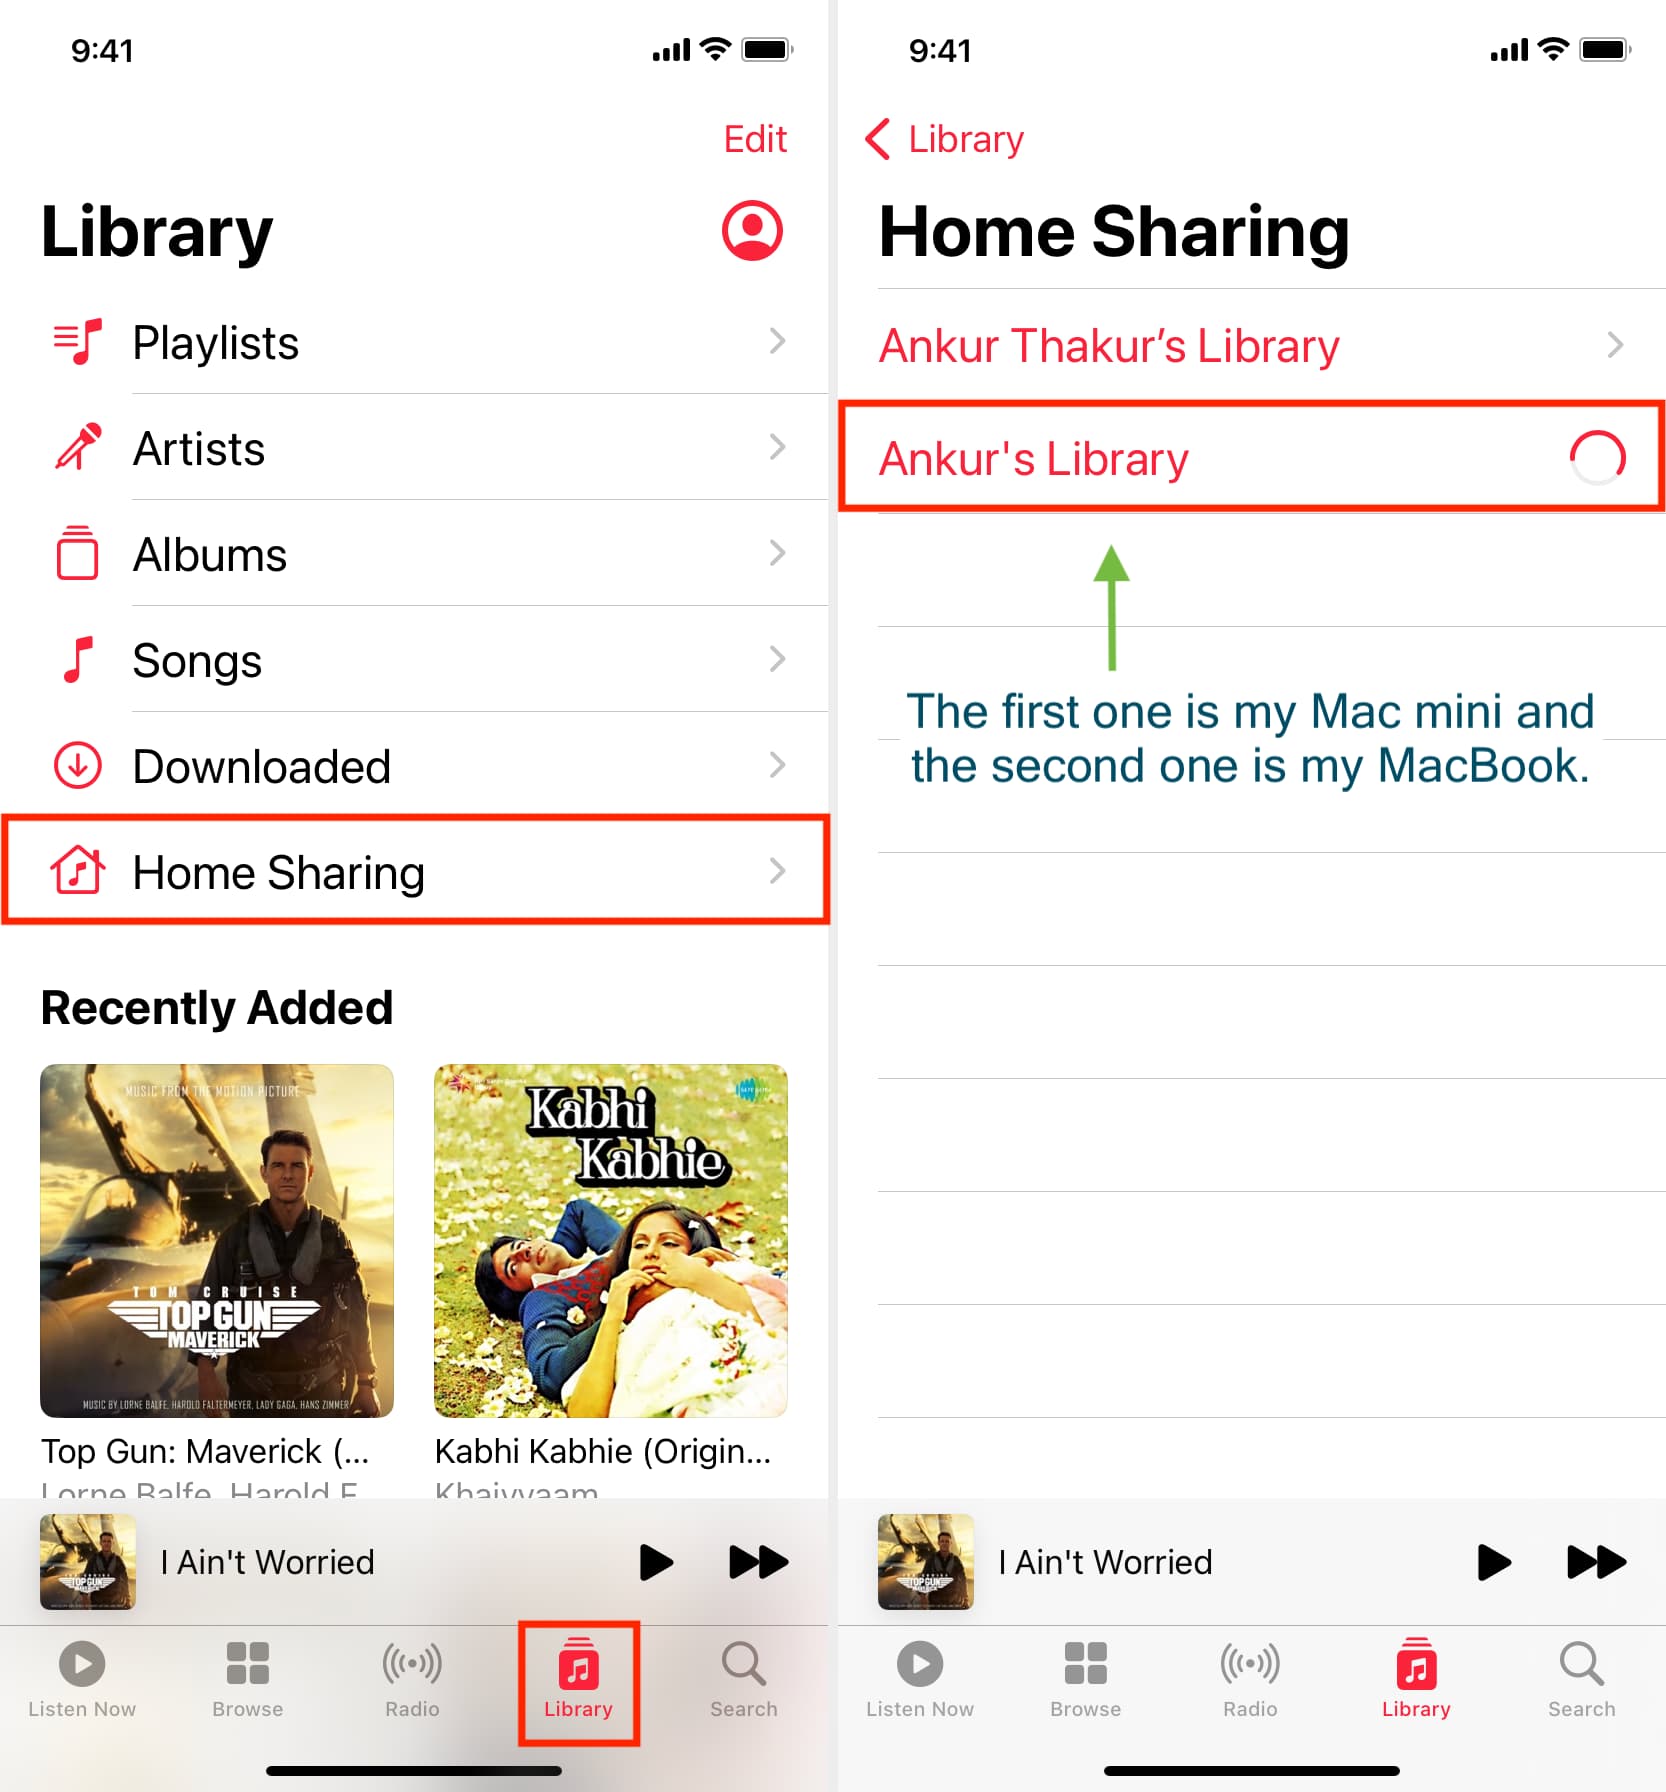 Home Sharing from Mac in iPhone Music app